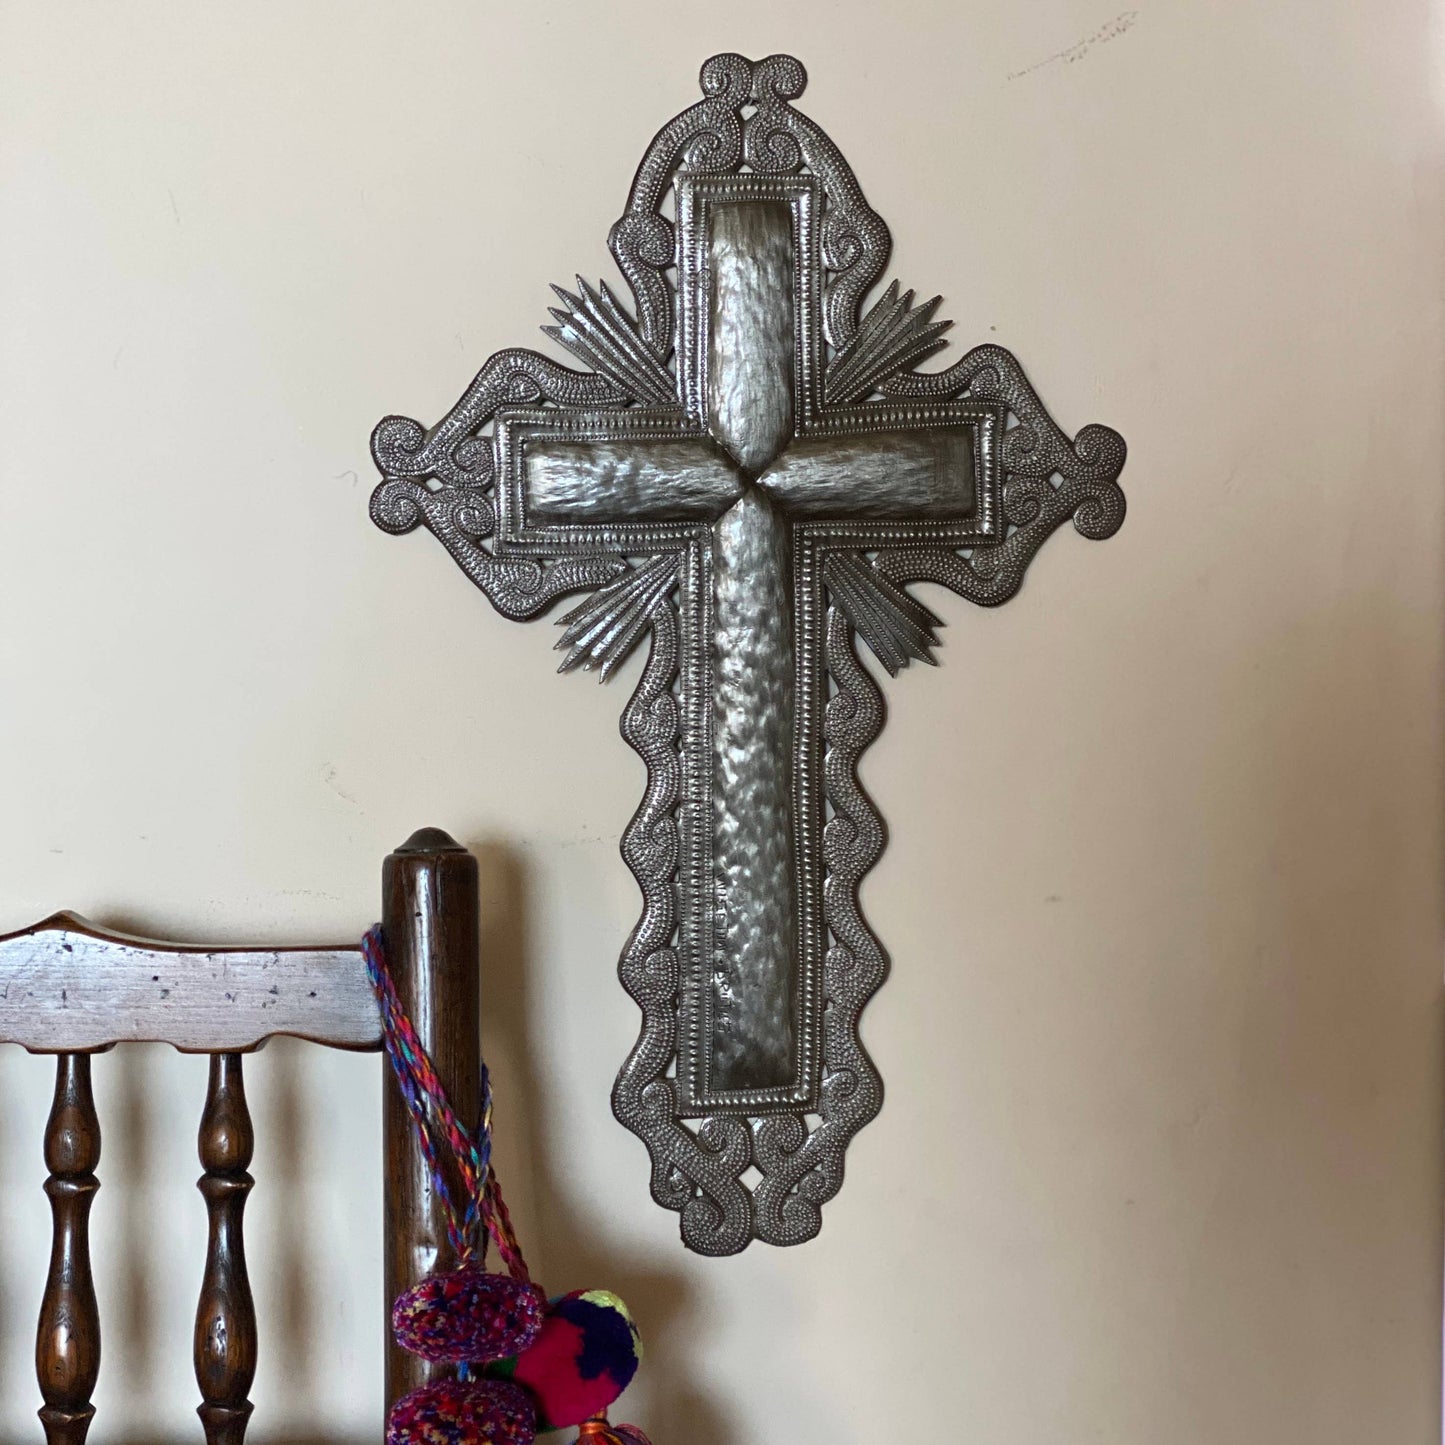 11.5" x 8.25" Wall Cross, Religious, Upcycled Artwork